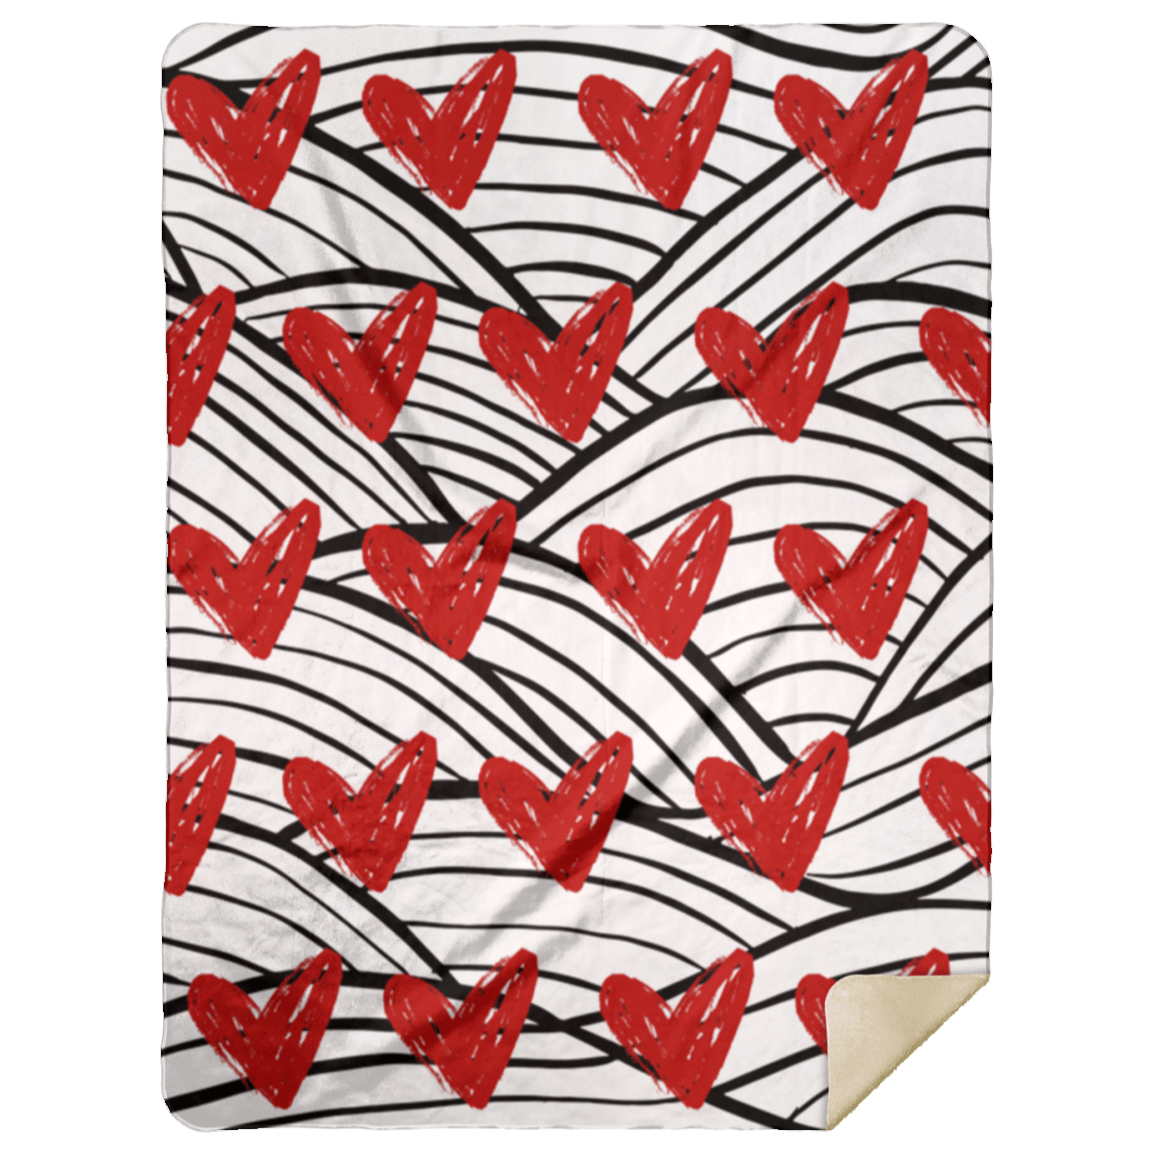 CustomCat Apparel Mother's Day Hearts Blanket1 / White / One Size Hearts Blanket | Mother's Day, Valentine's, Soulmate